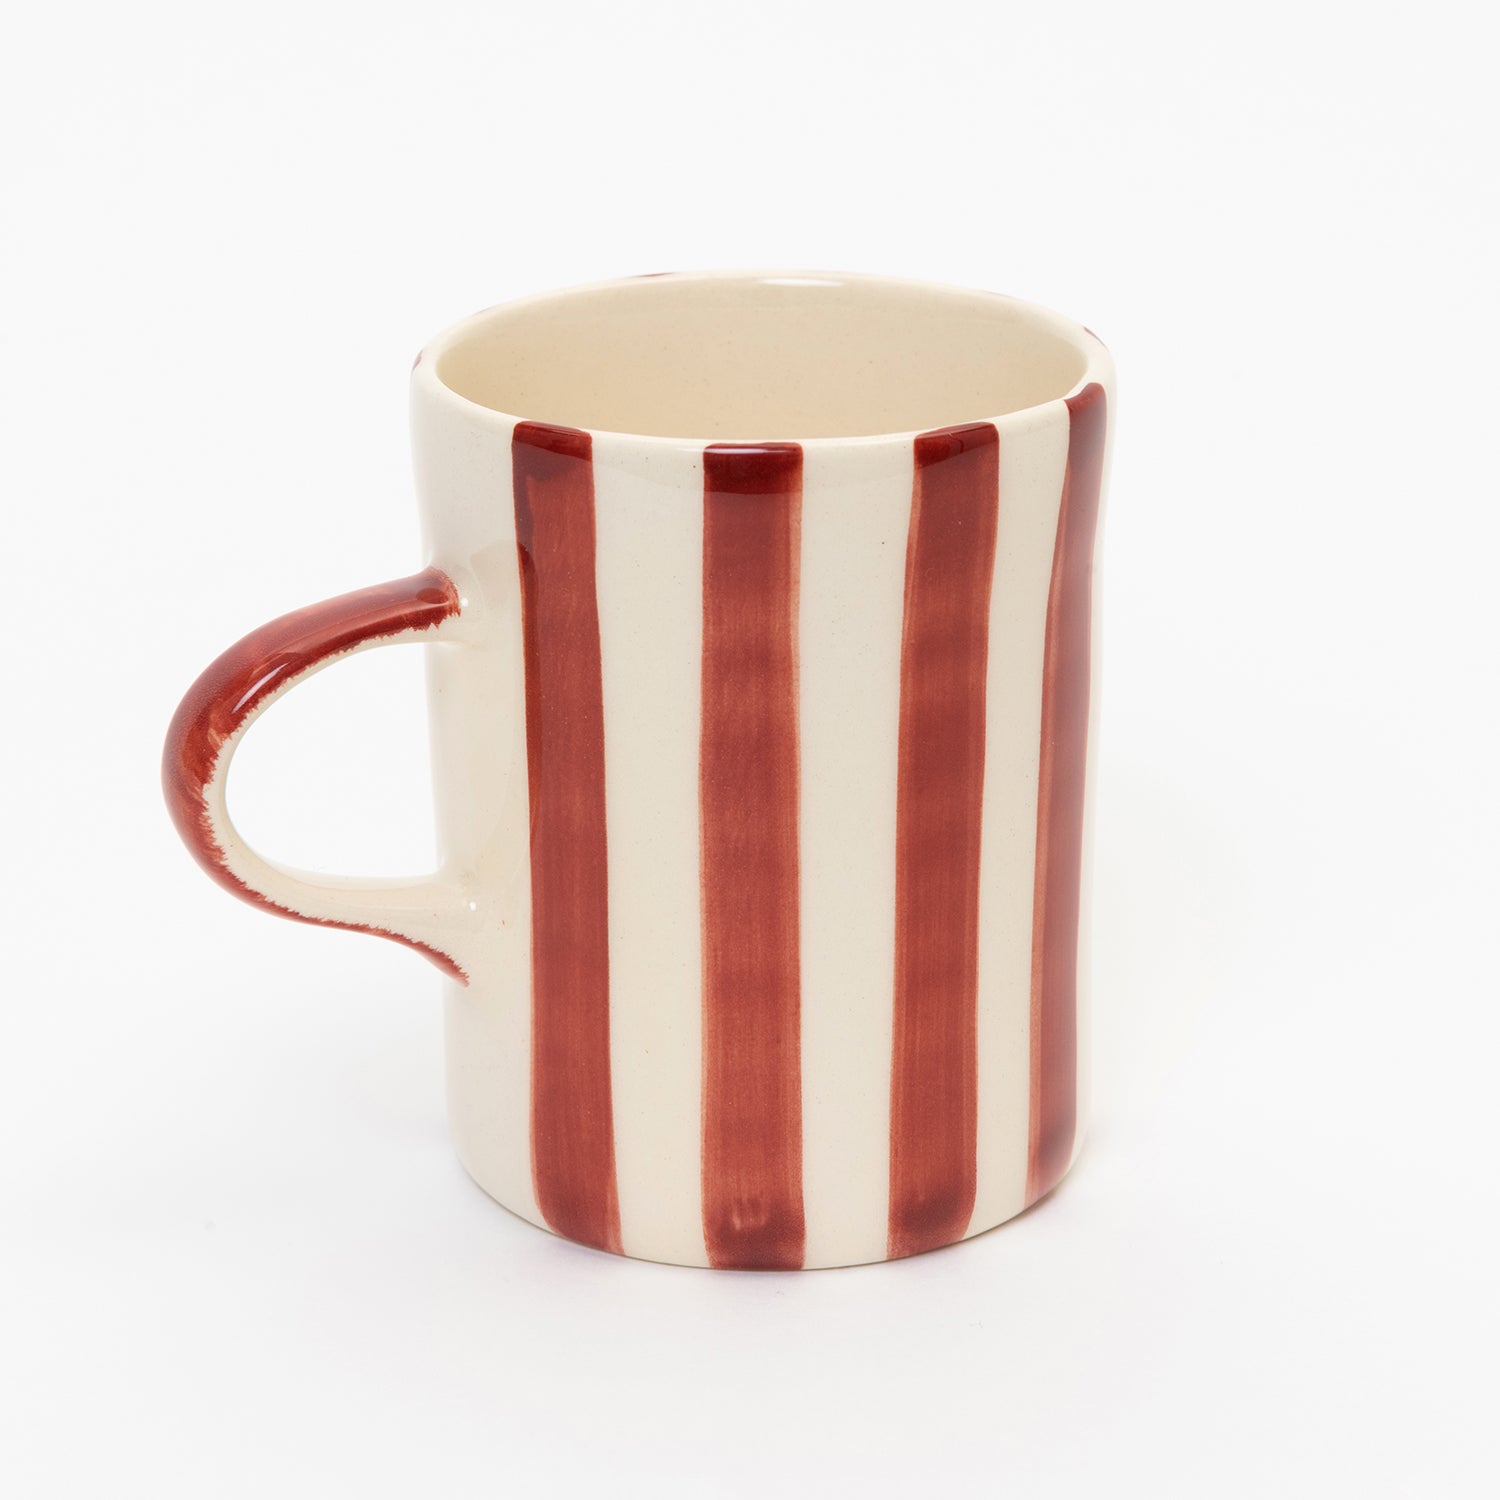 Red and white striped mug with red handle